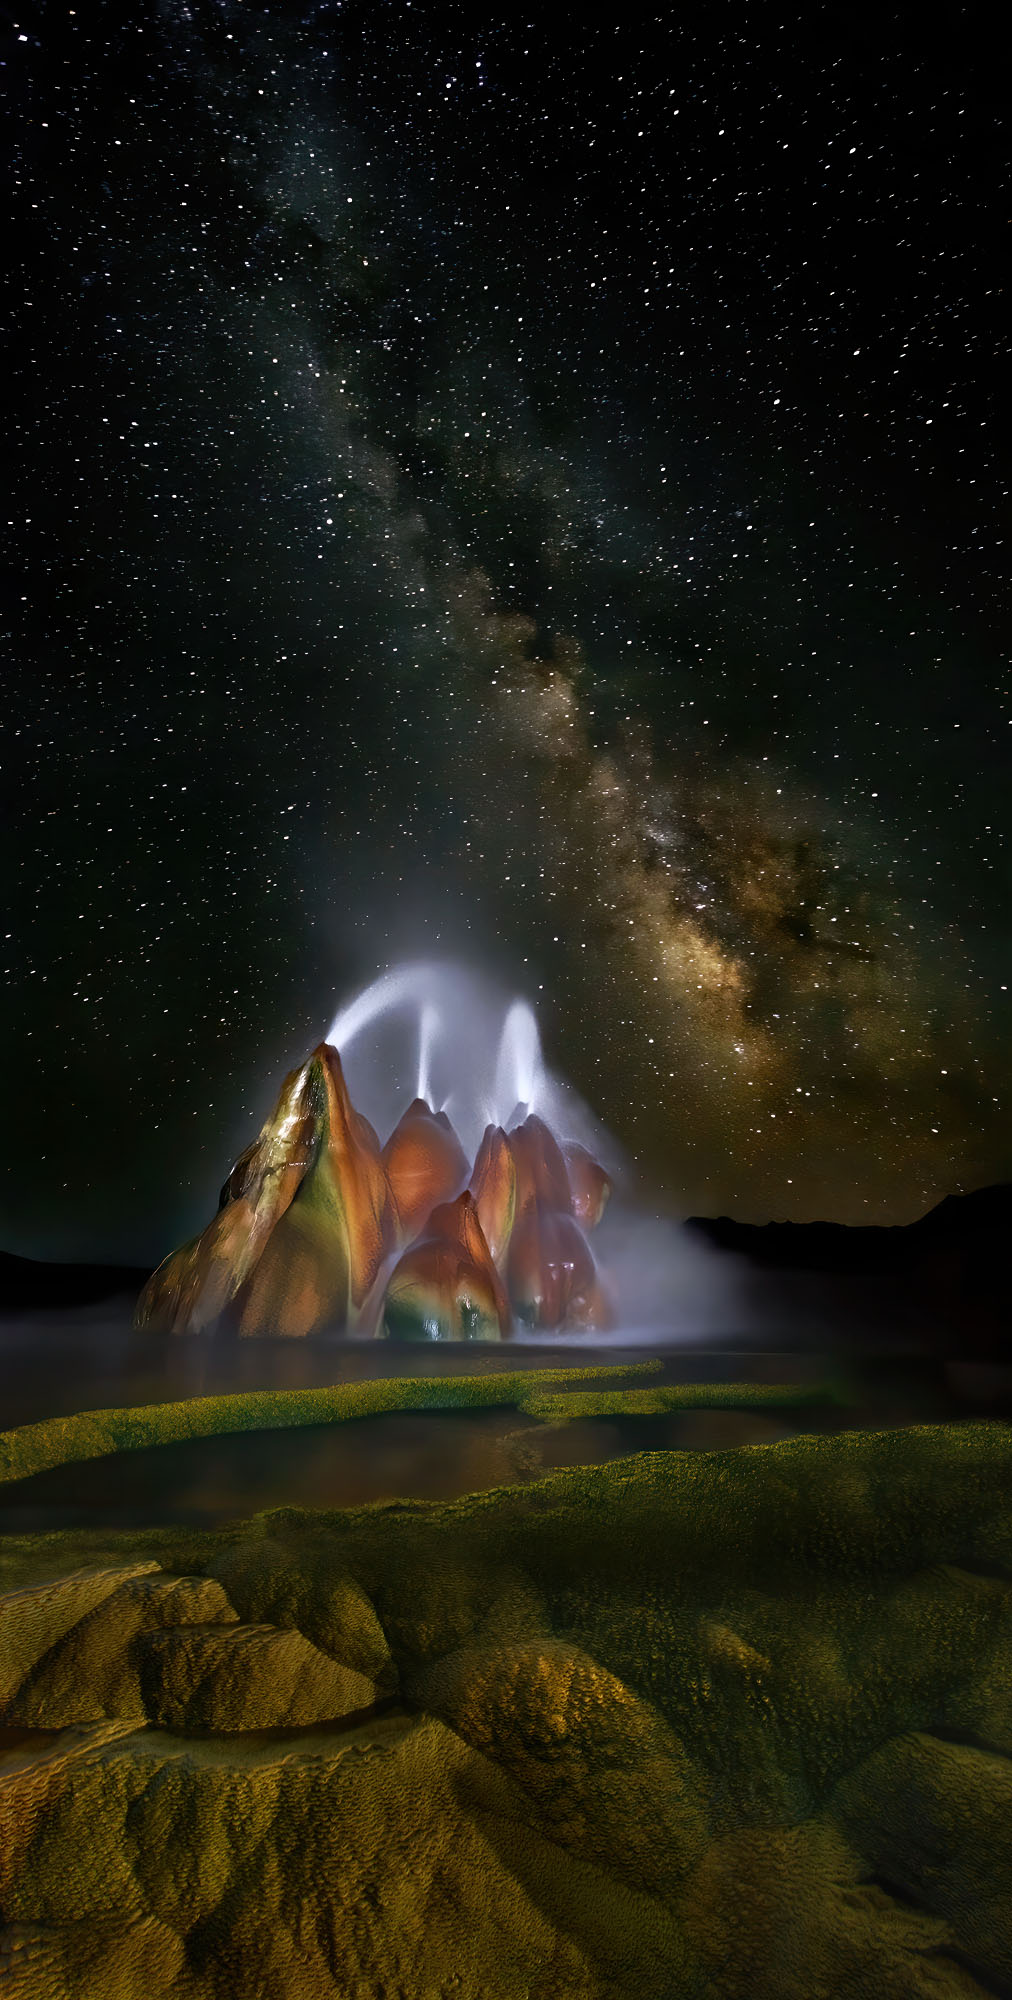 Nighttime Fly Geyser spouting water under the stars of the Milky Way in the Nevada Black Rock Desert